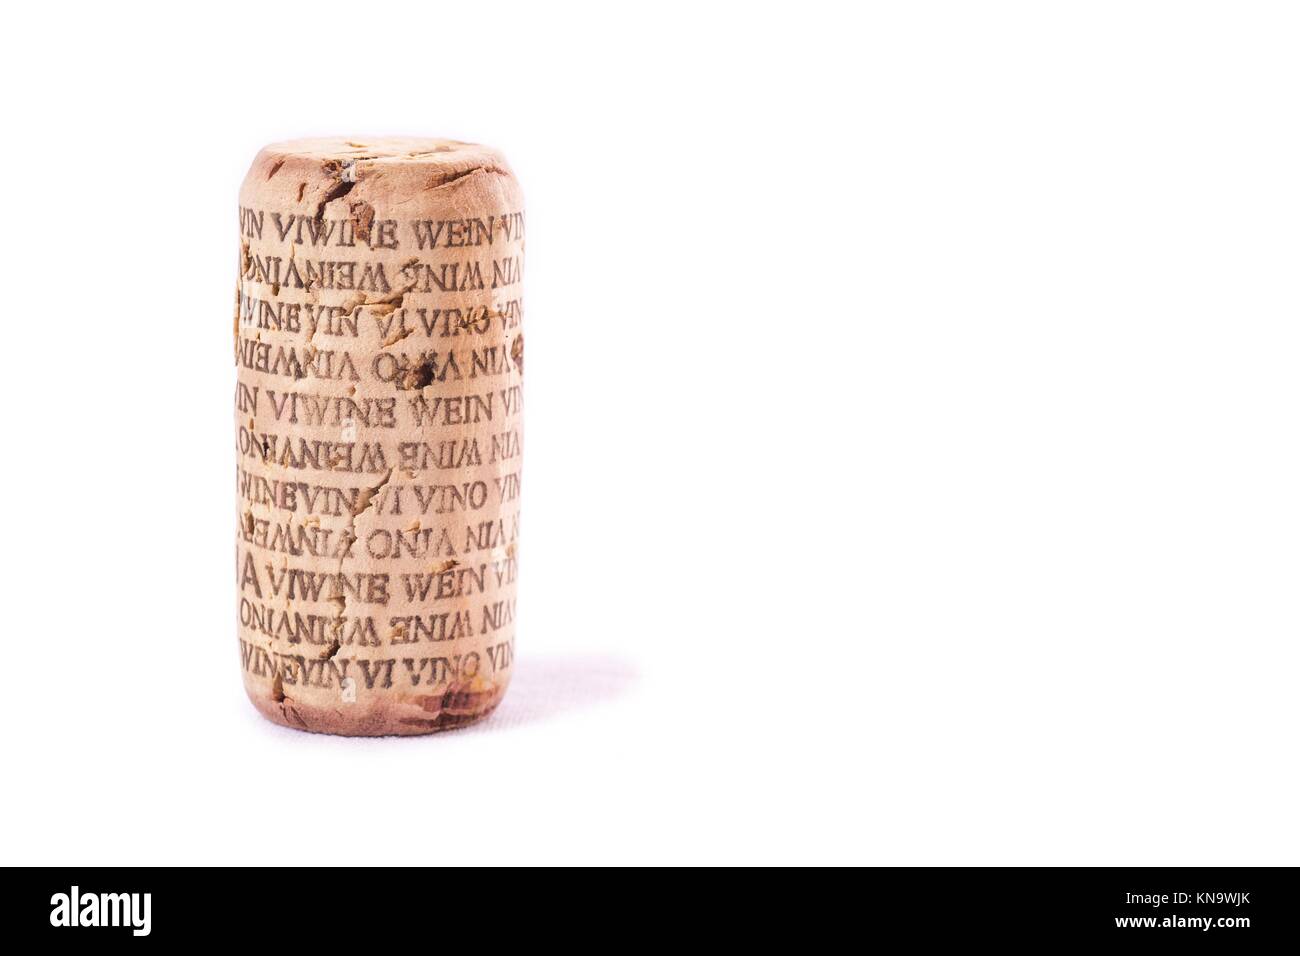 Wine cork with word wine in several languages. Isolated. Stock Photo